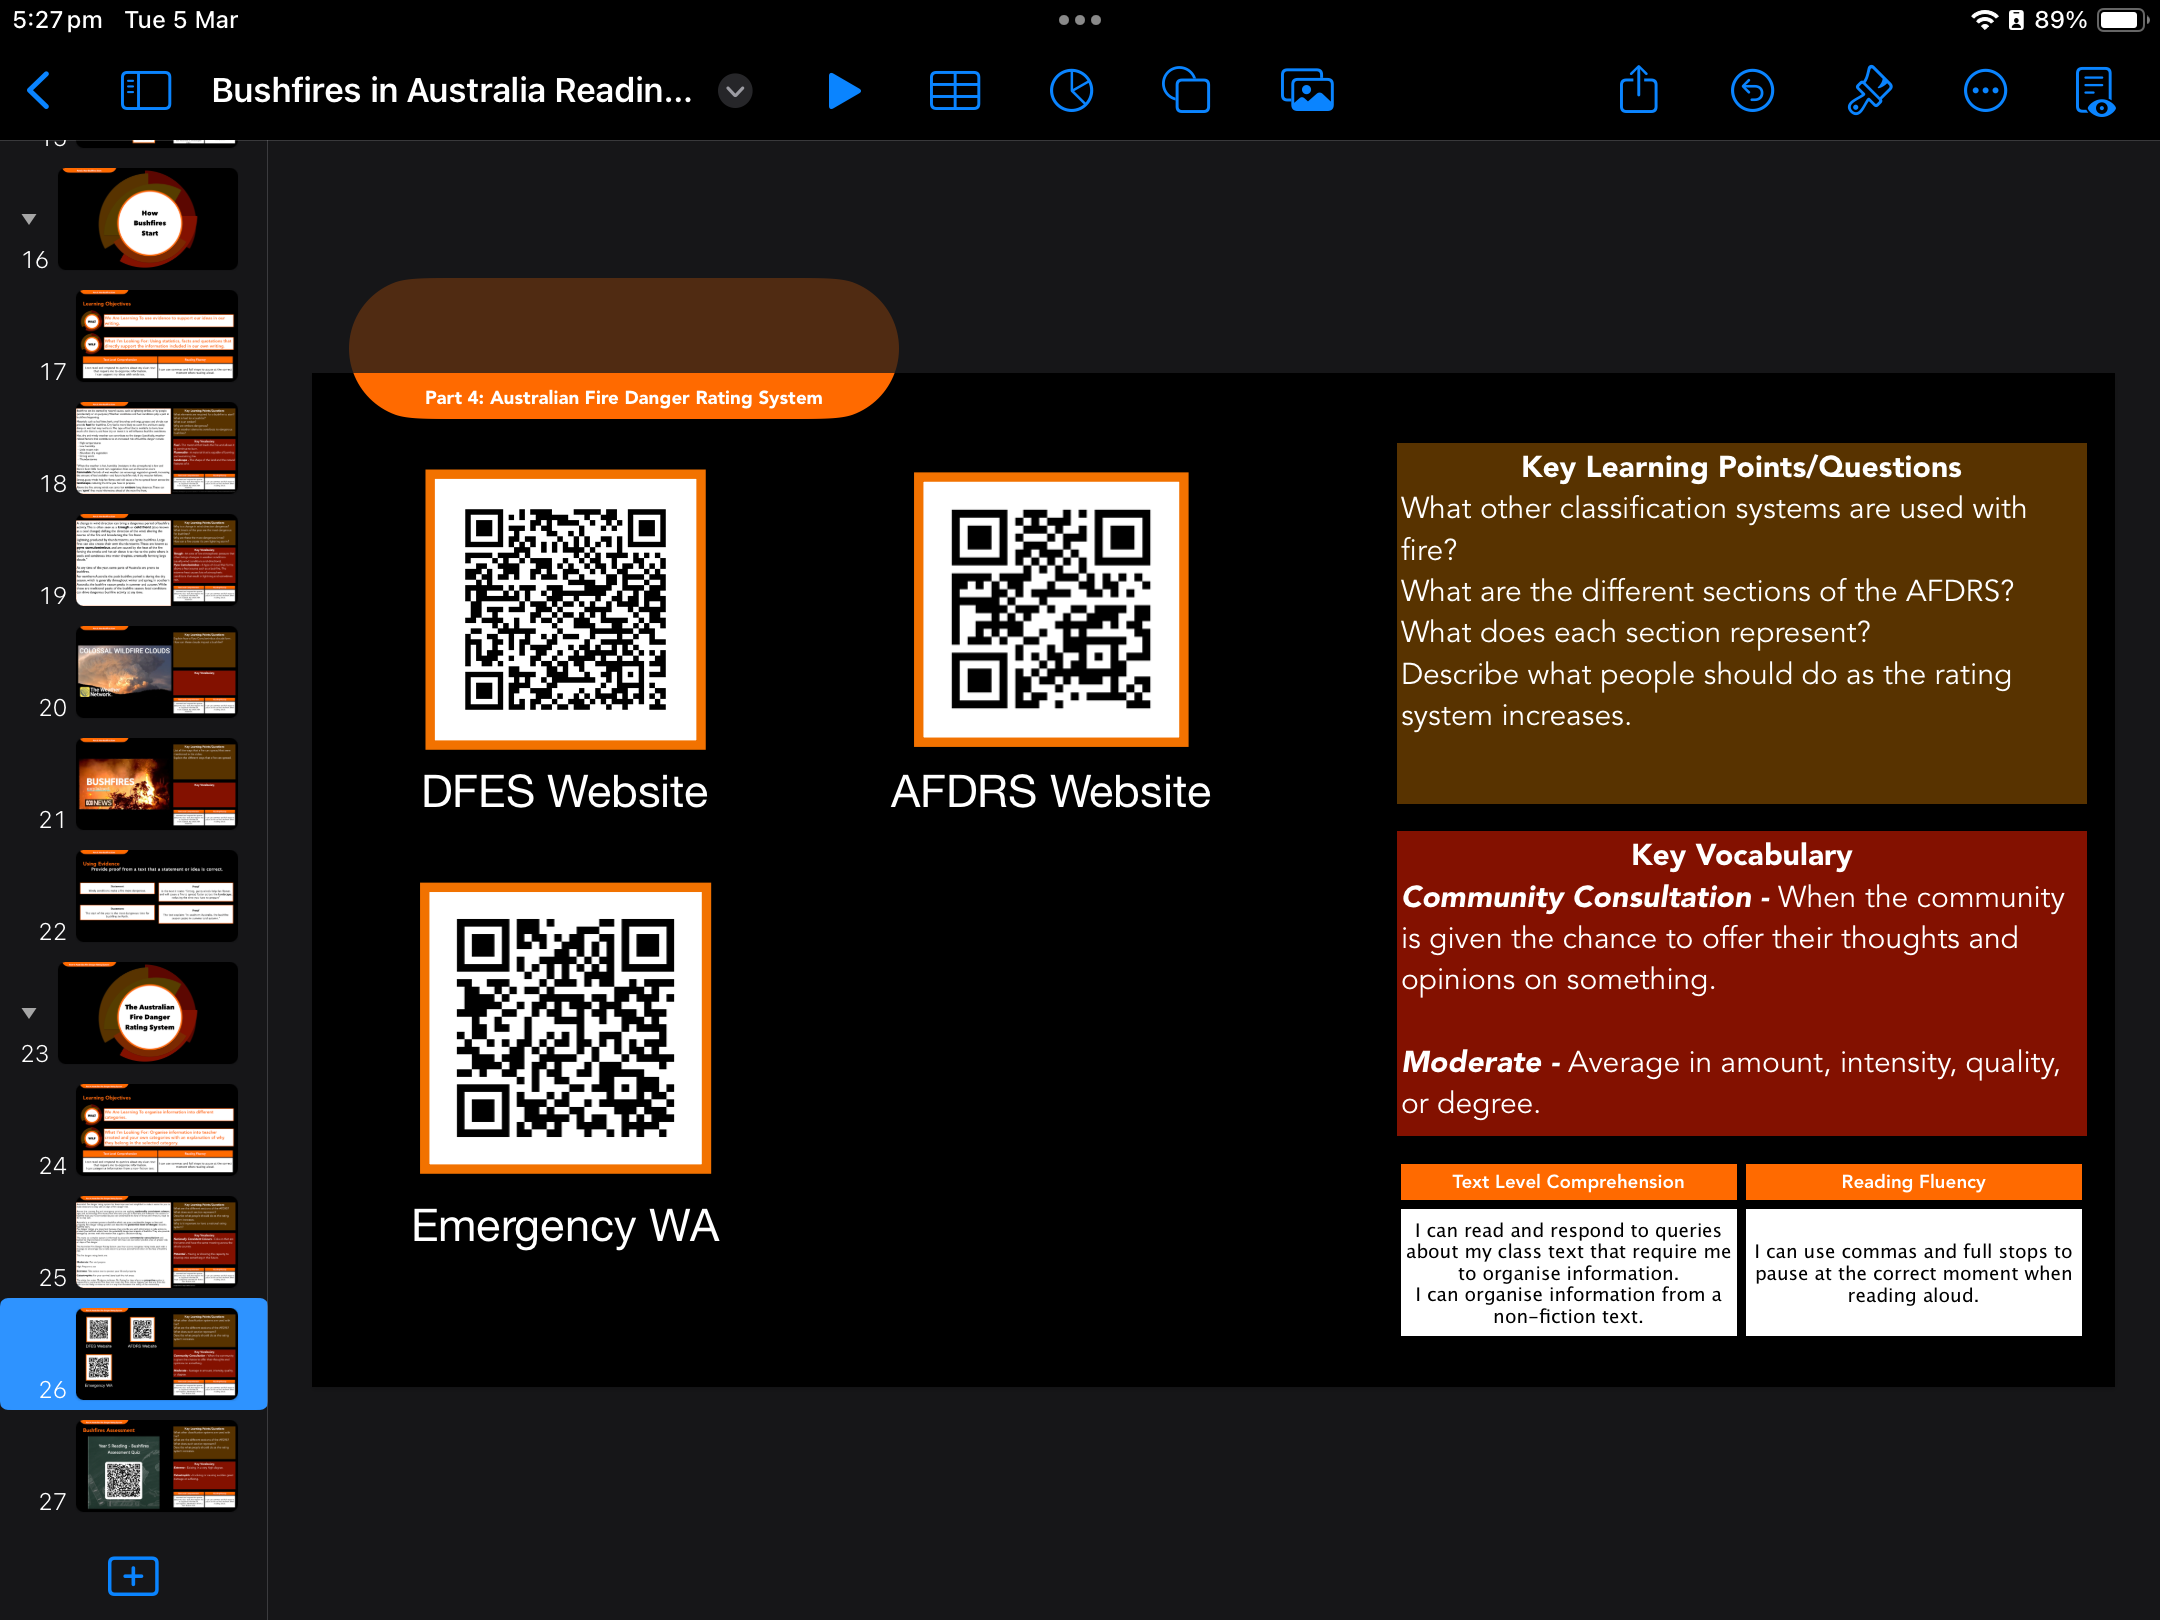 Another slide from the teacher's presentation. This one uses QR codes to direct students to supplementary resources.